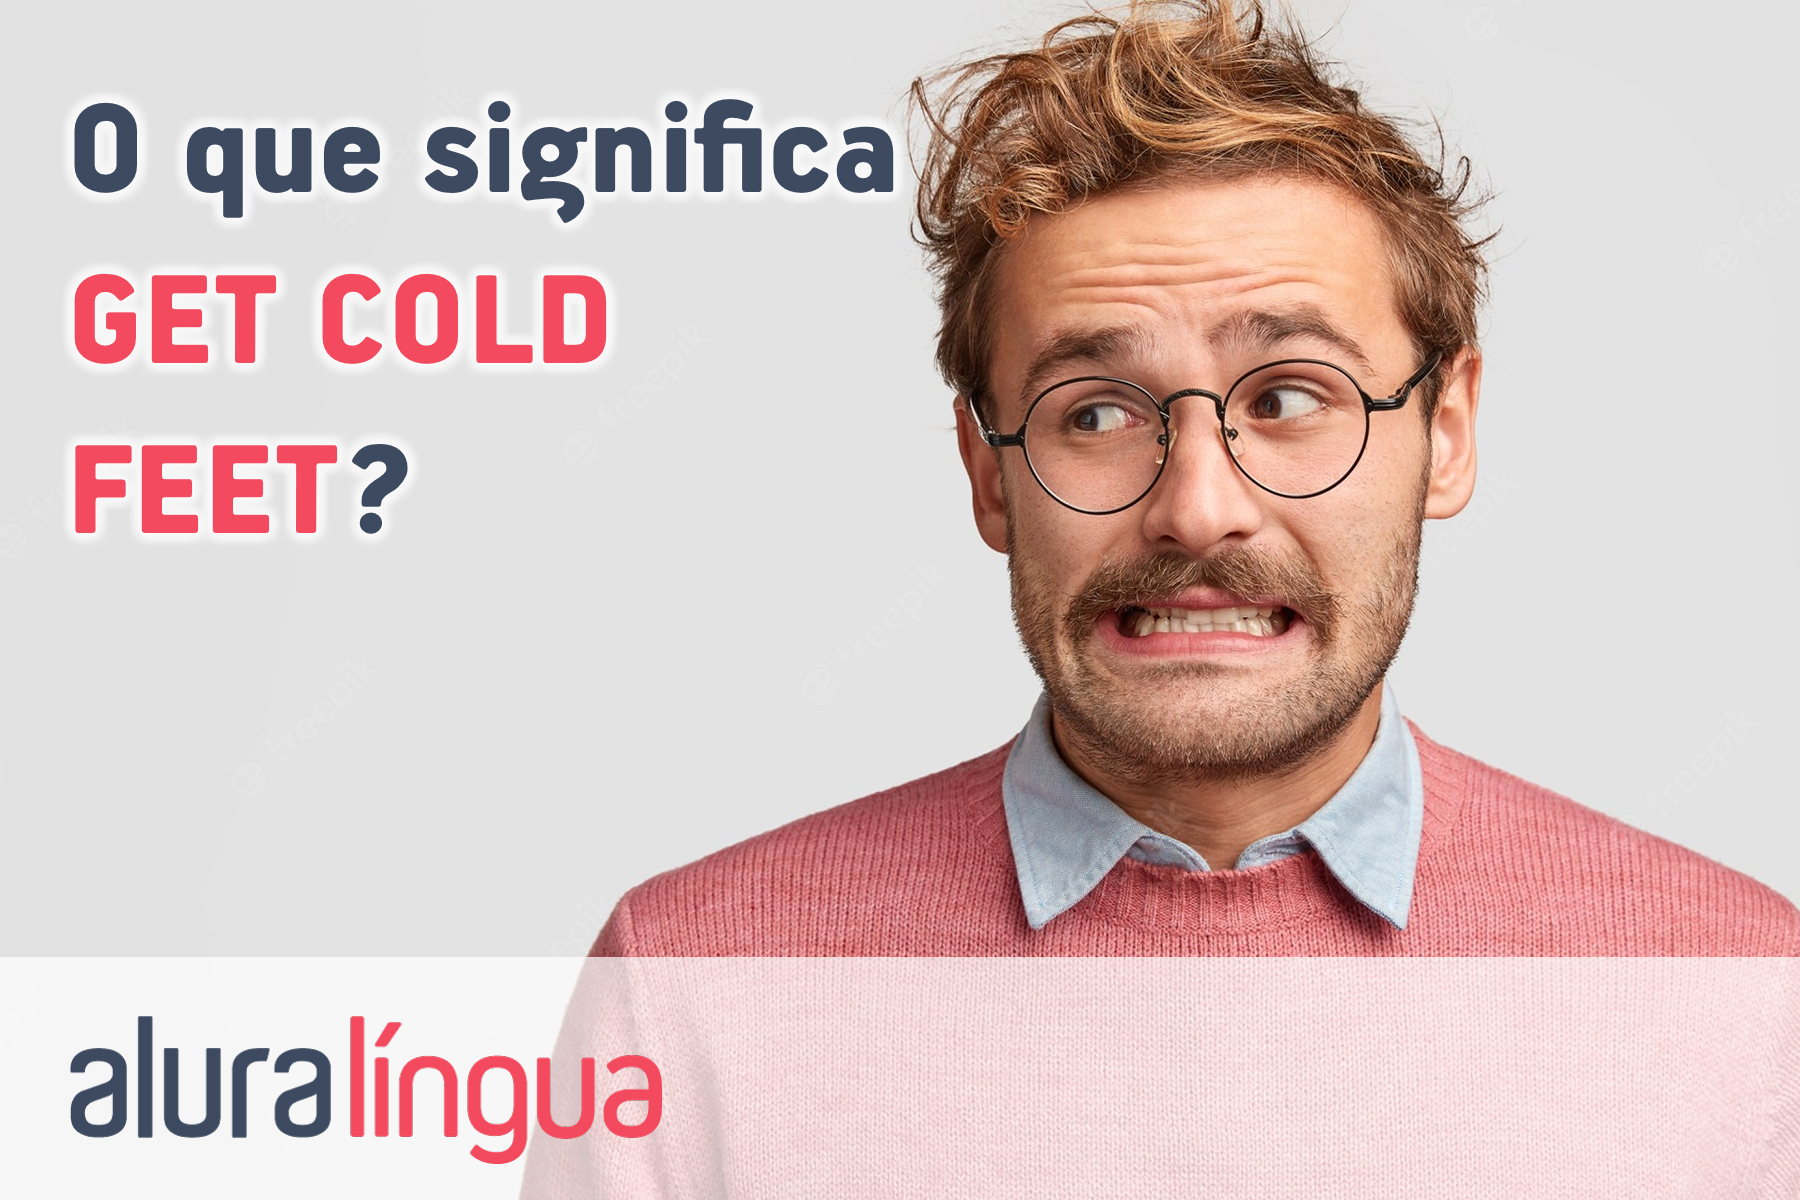 O que significa GET COLD FEET? #inset